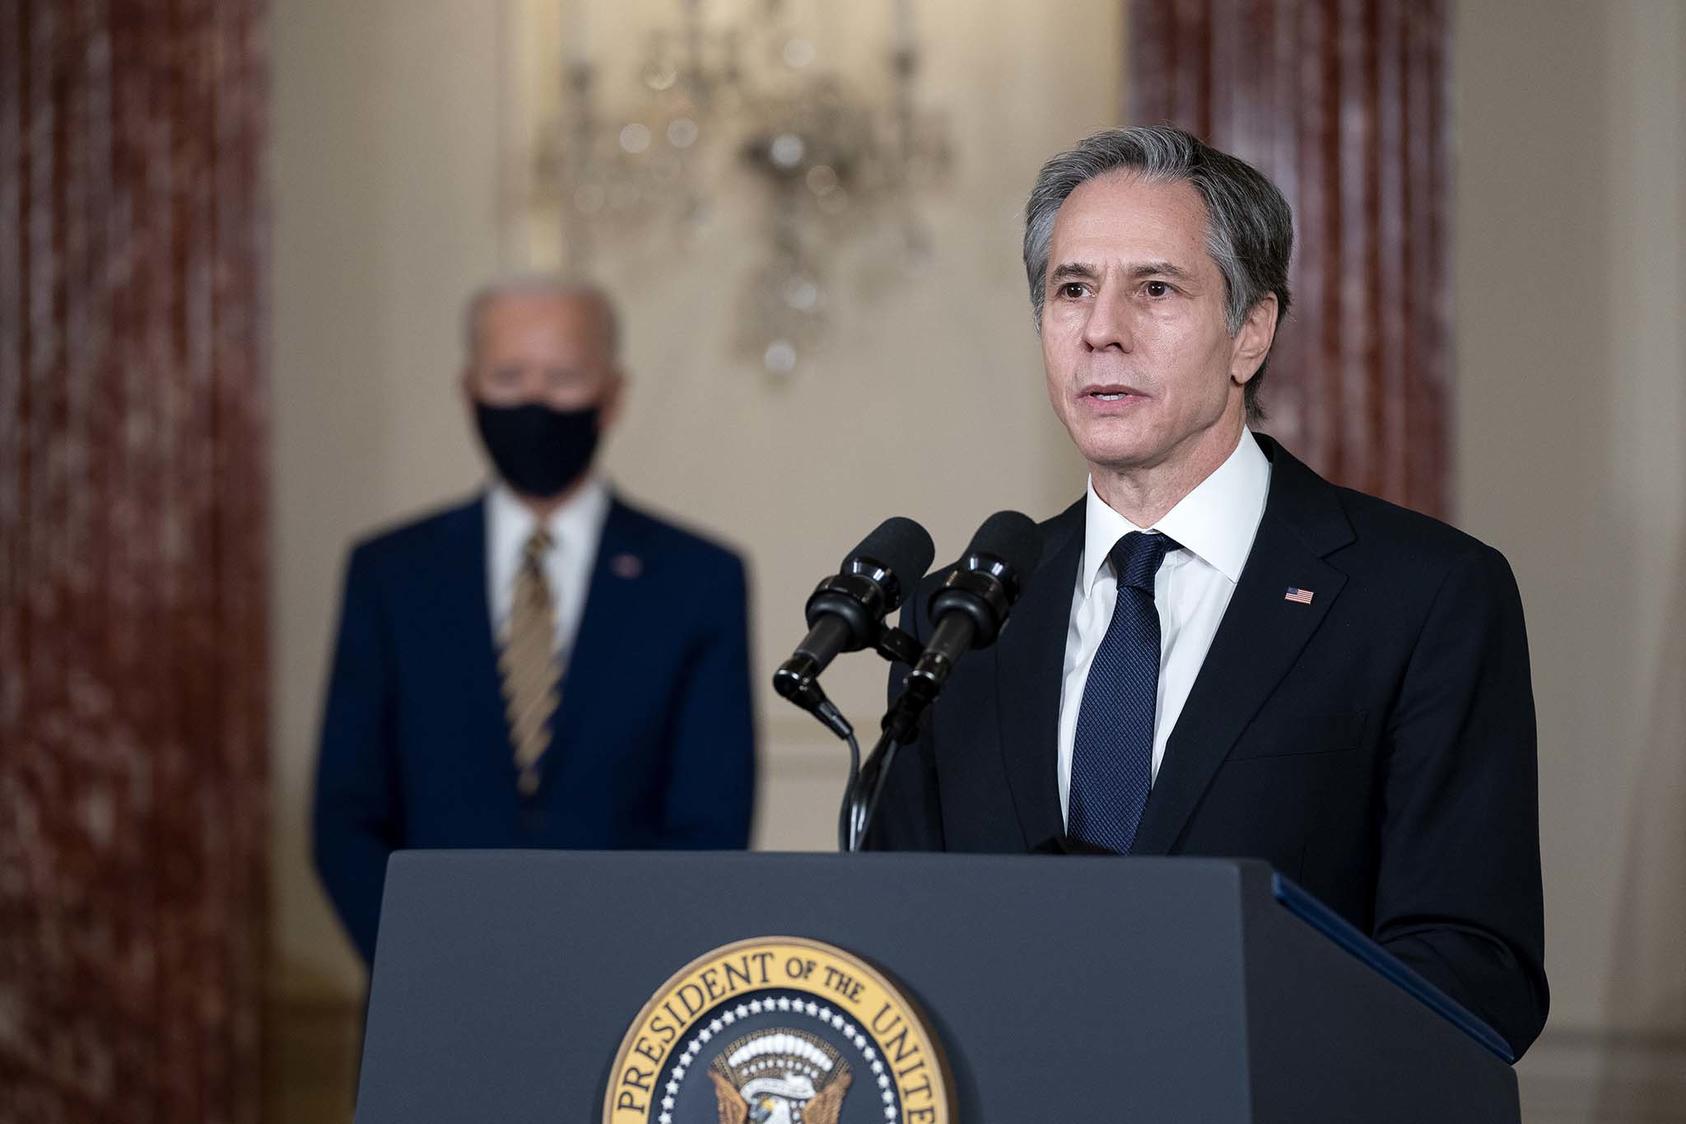 A leaked letter from Secretary of State Blinken to Afghan President Ghani proposed new efforts to bolster the Afghan peace process, including the formation of an interim power-sharing government, and warned that the U.S. is still considering withdrawing troops in May. (Stefani Reynolds/The New York Times)